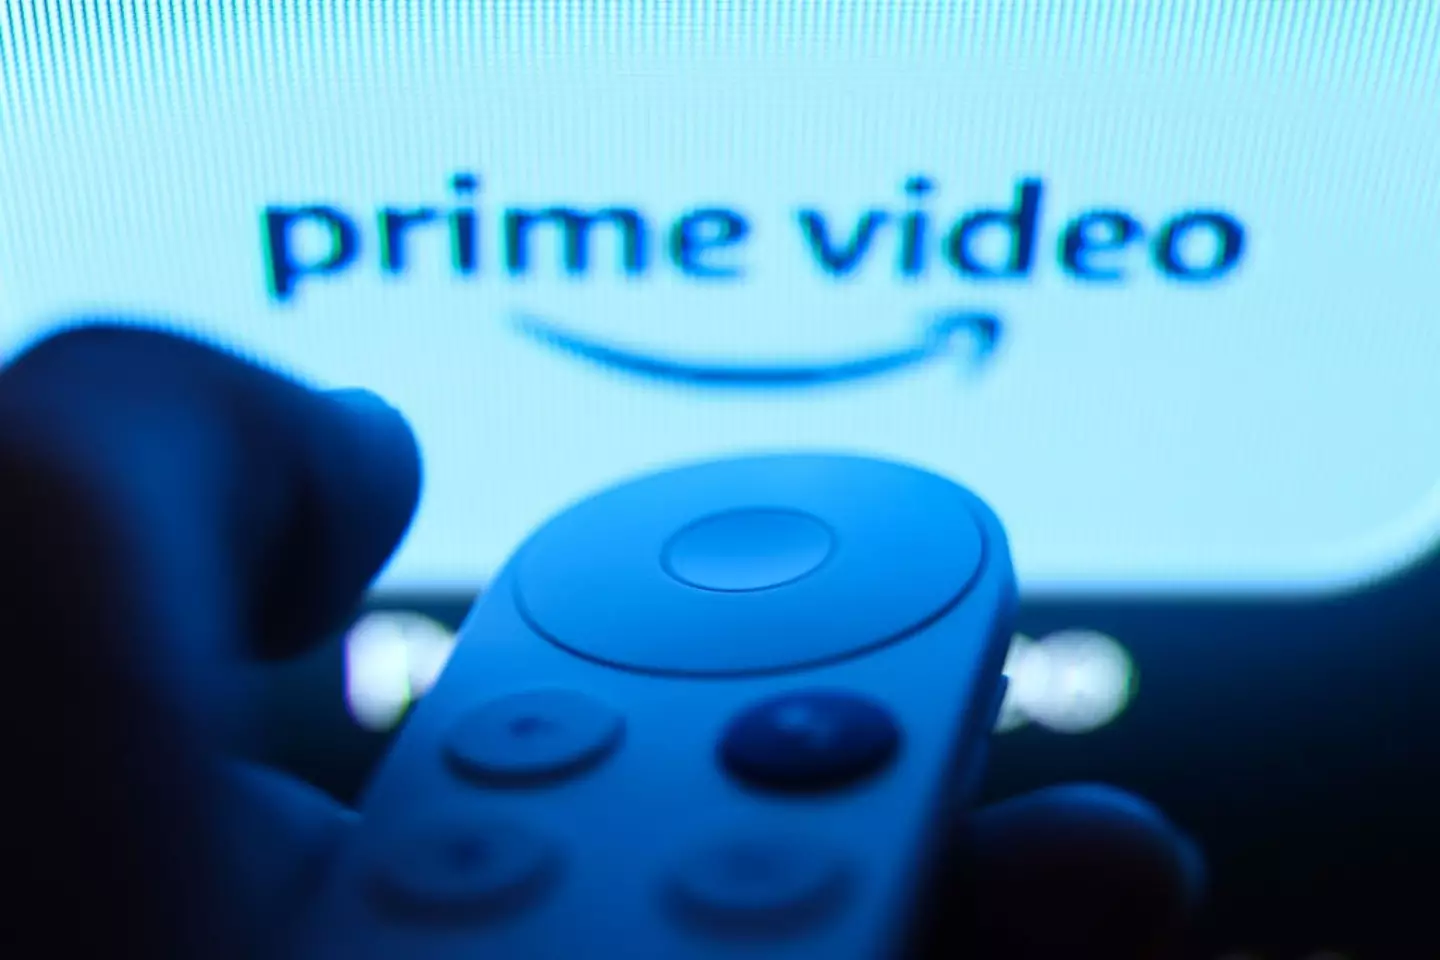 Amazon Prime has left people threatening to 'cancel' their subscriptions after introducing adverts.